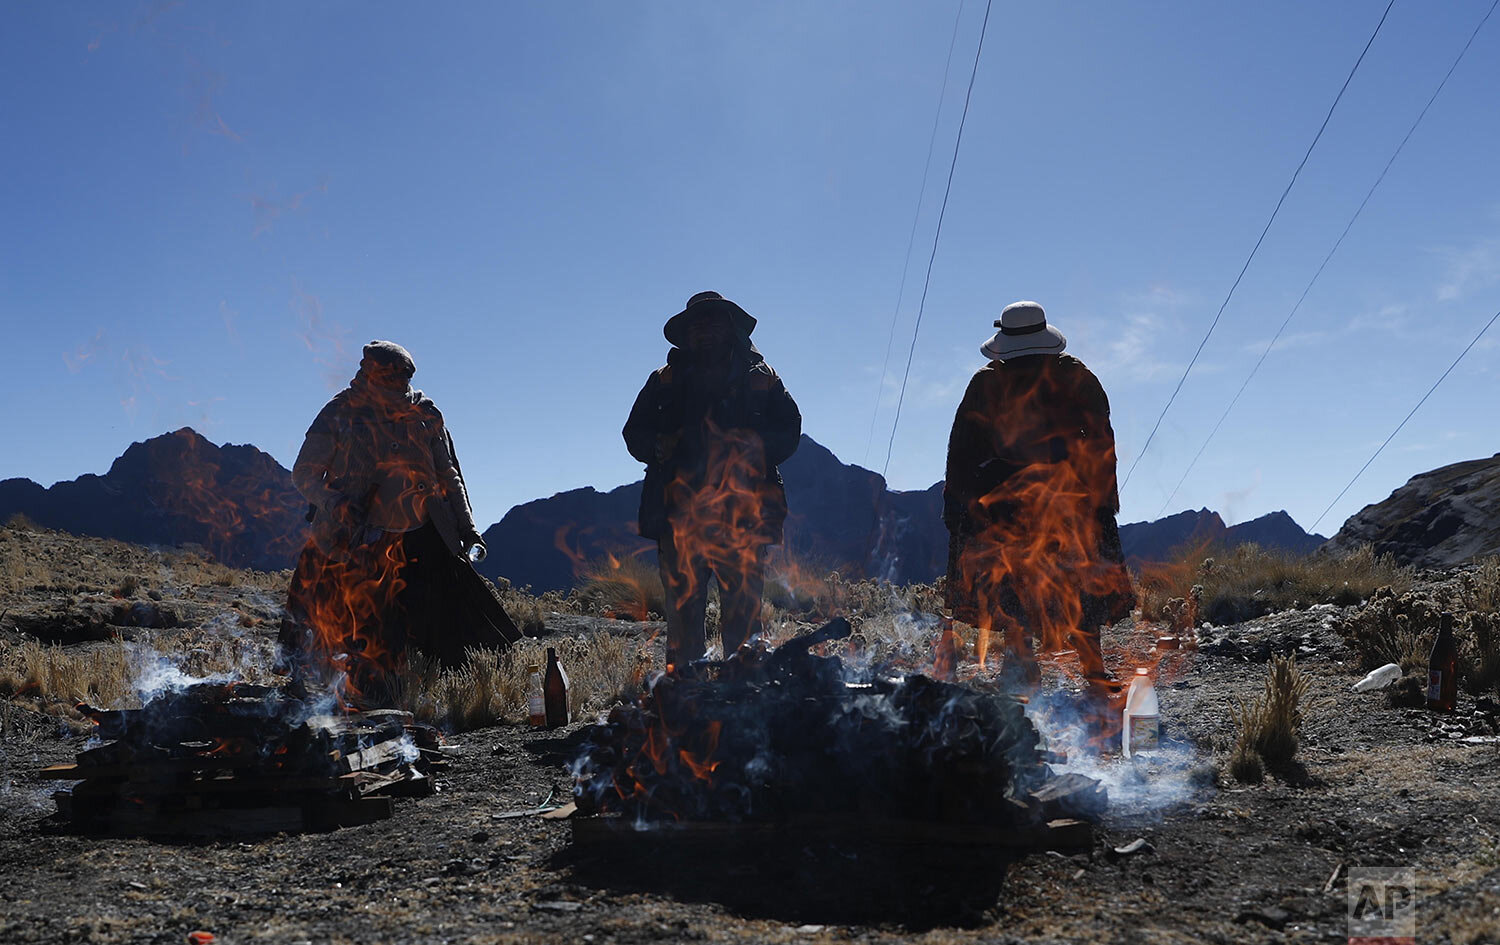  People burn offerings in honor of "Pachamama" or Mother Earth, on La Cumbre, a mountain considered sacred on the outskirts of La Paz, Bolivia, Aug. 1, 2020. (AP Photo/Juan Karita) 